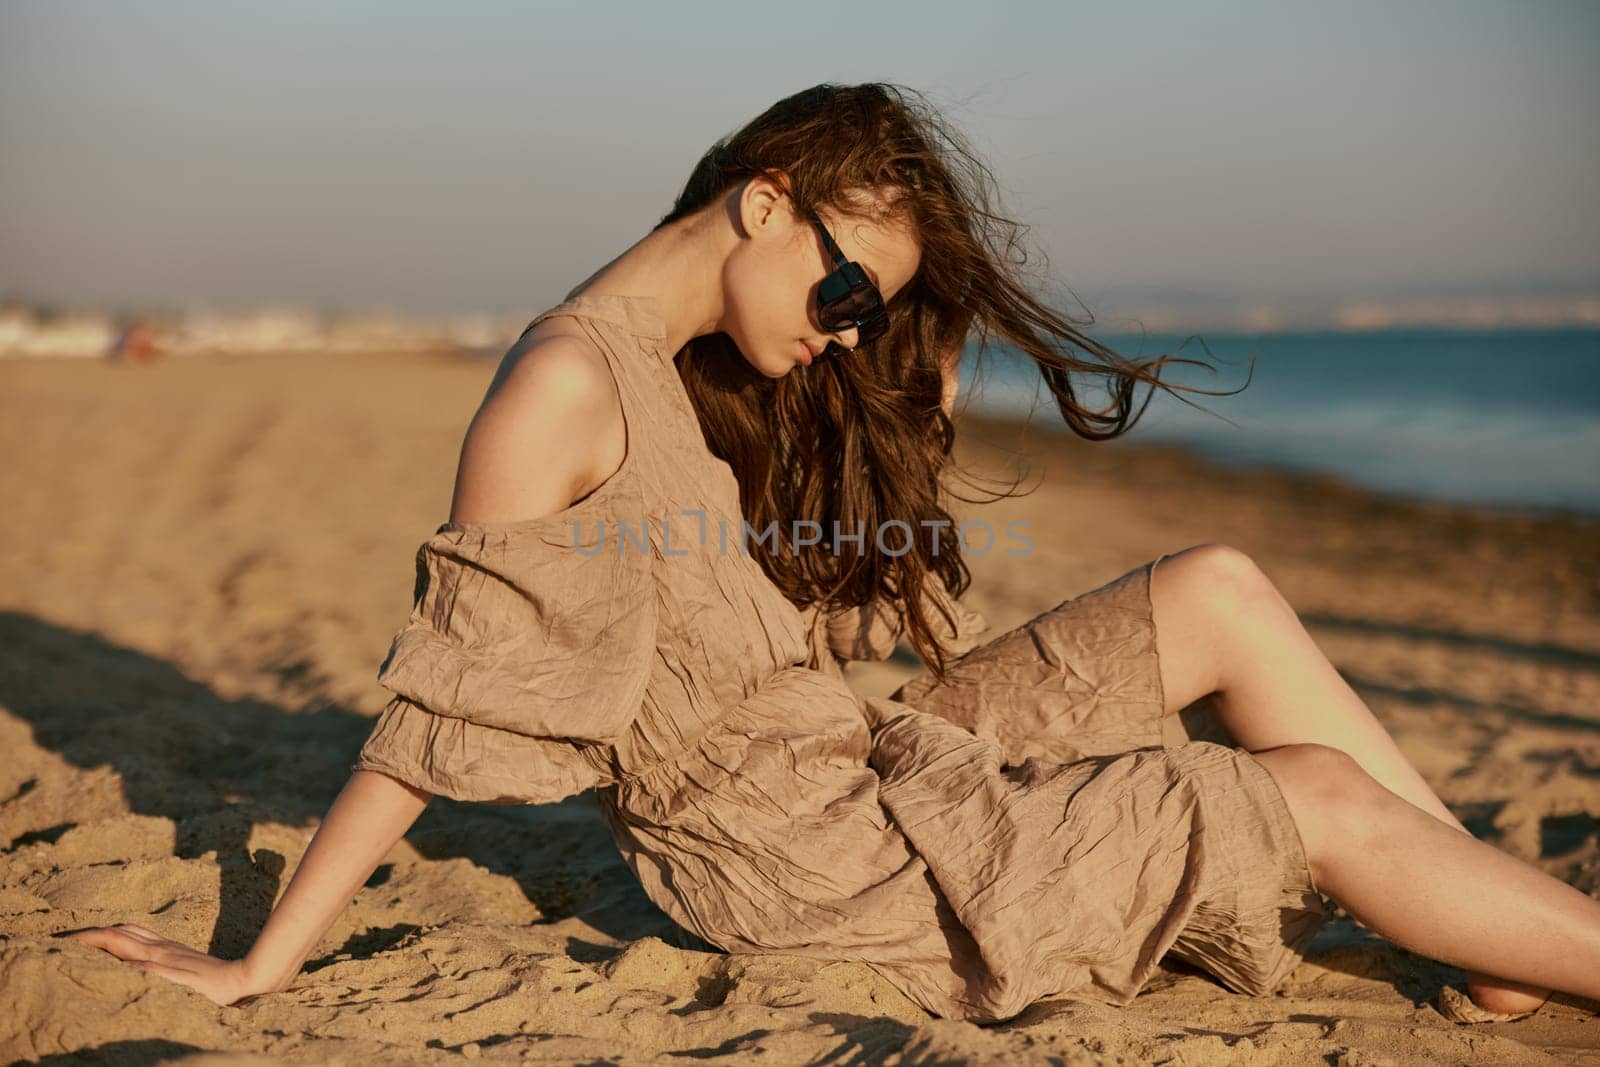 red-haired woman in dark sunglasses and sand-colored dress on the beach enjoying the sunset. High quality photo